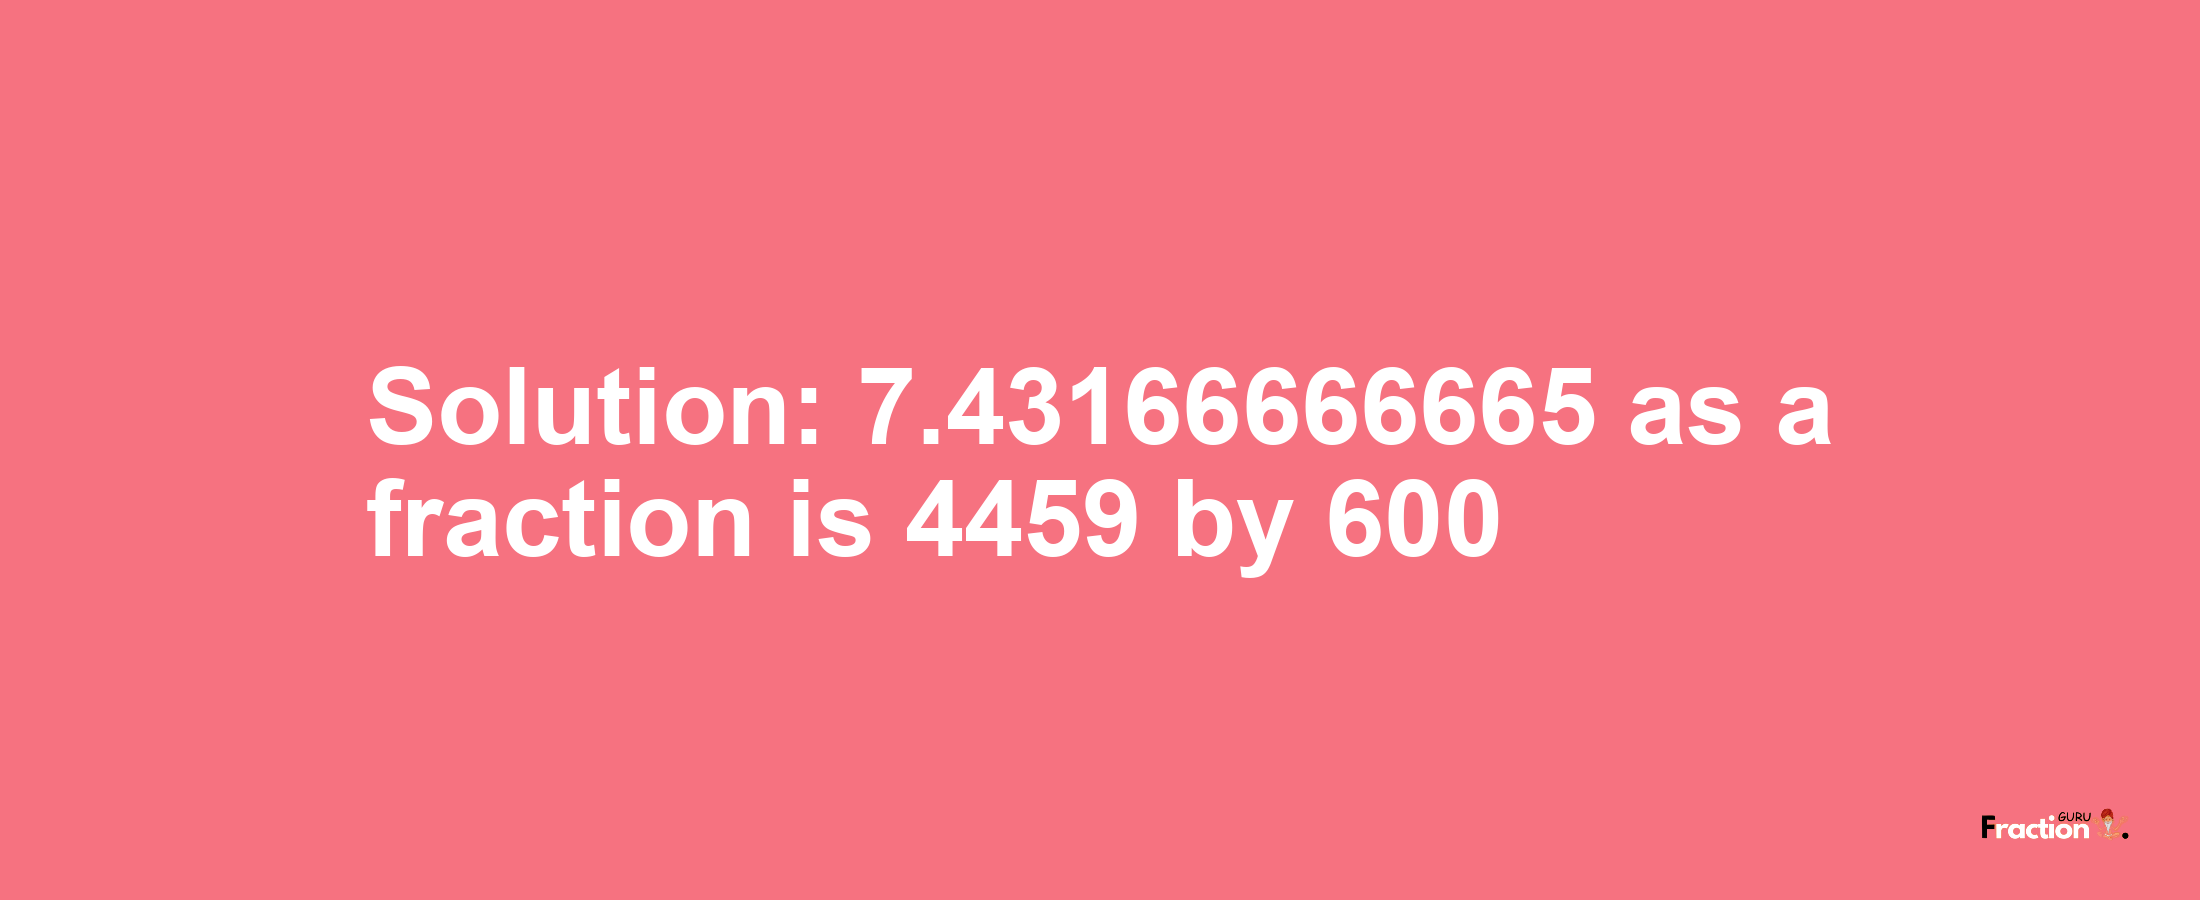 Solution:7.43166666665 as a fraction is 4459/600